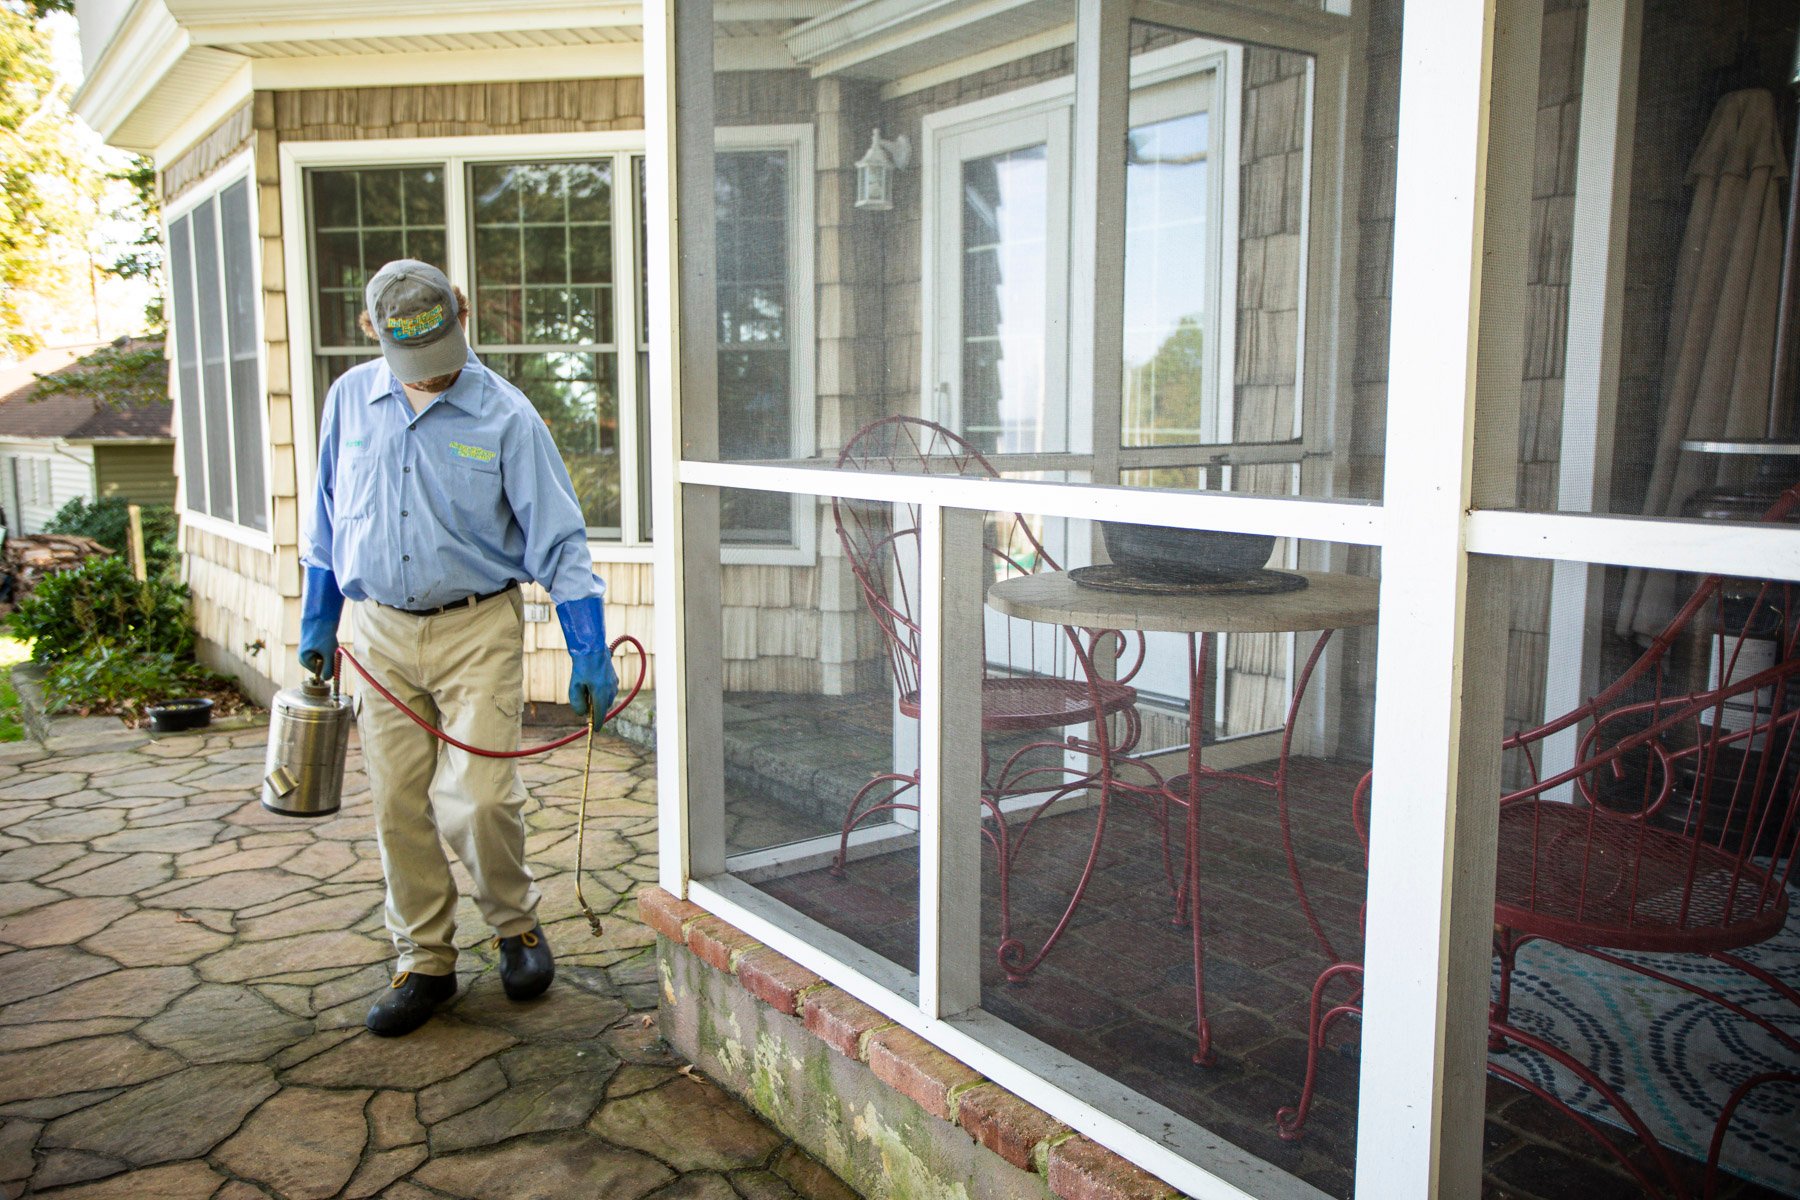 Pest control technician spraying the perimeter of the home